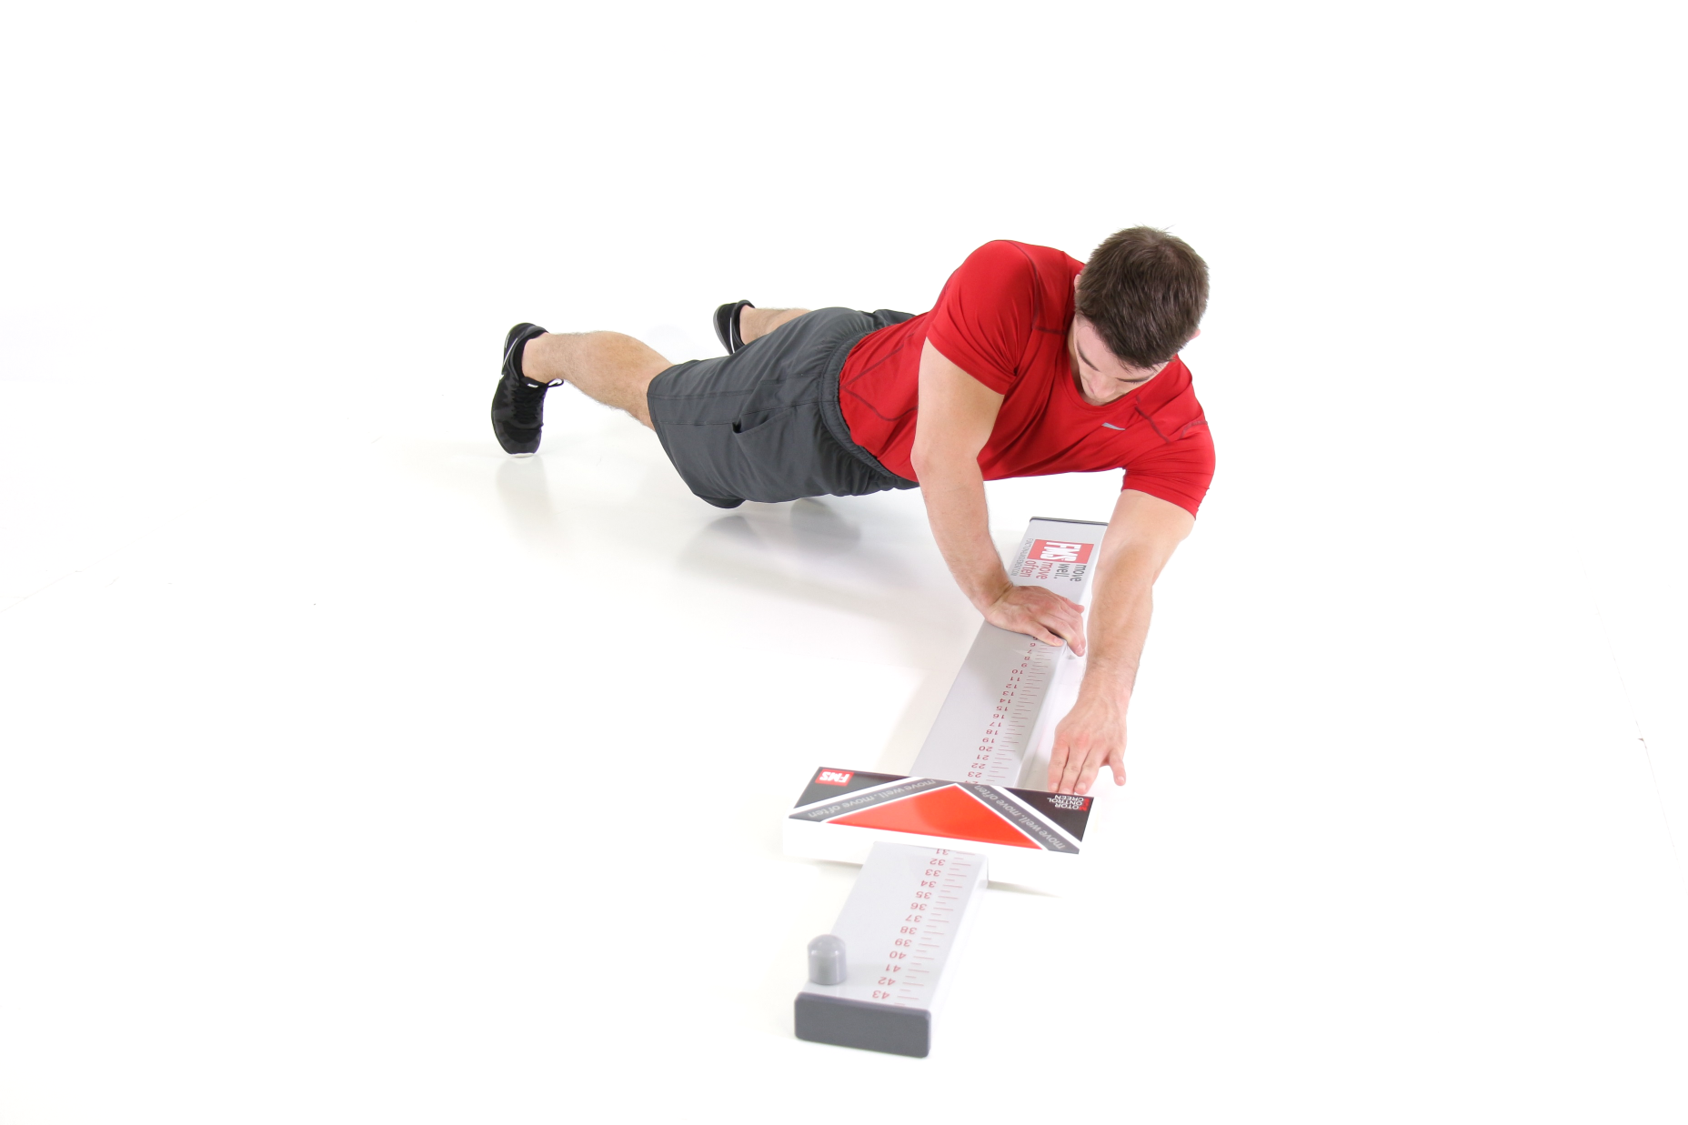 MCS Slide Box | Functional Movement Systems